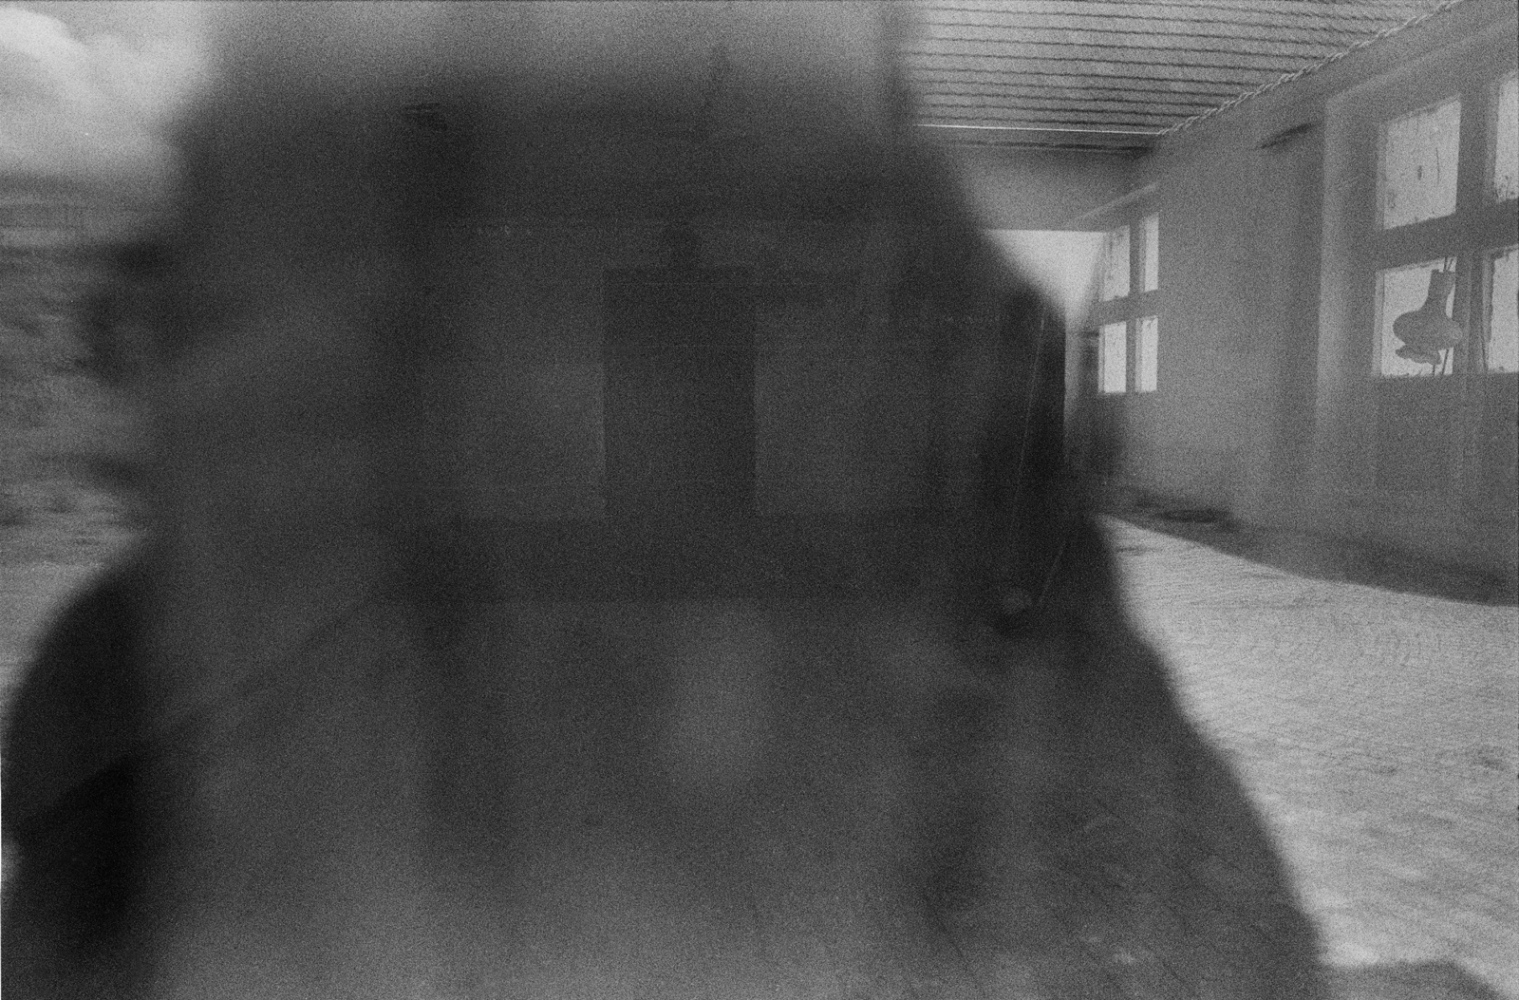 Looking Into the Void, former concentration camp, Ravensbruck, Germany 1996